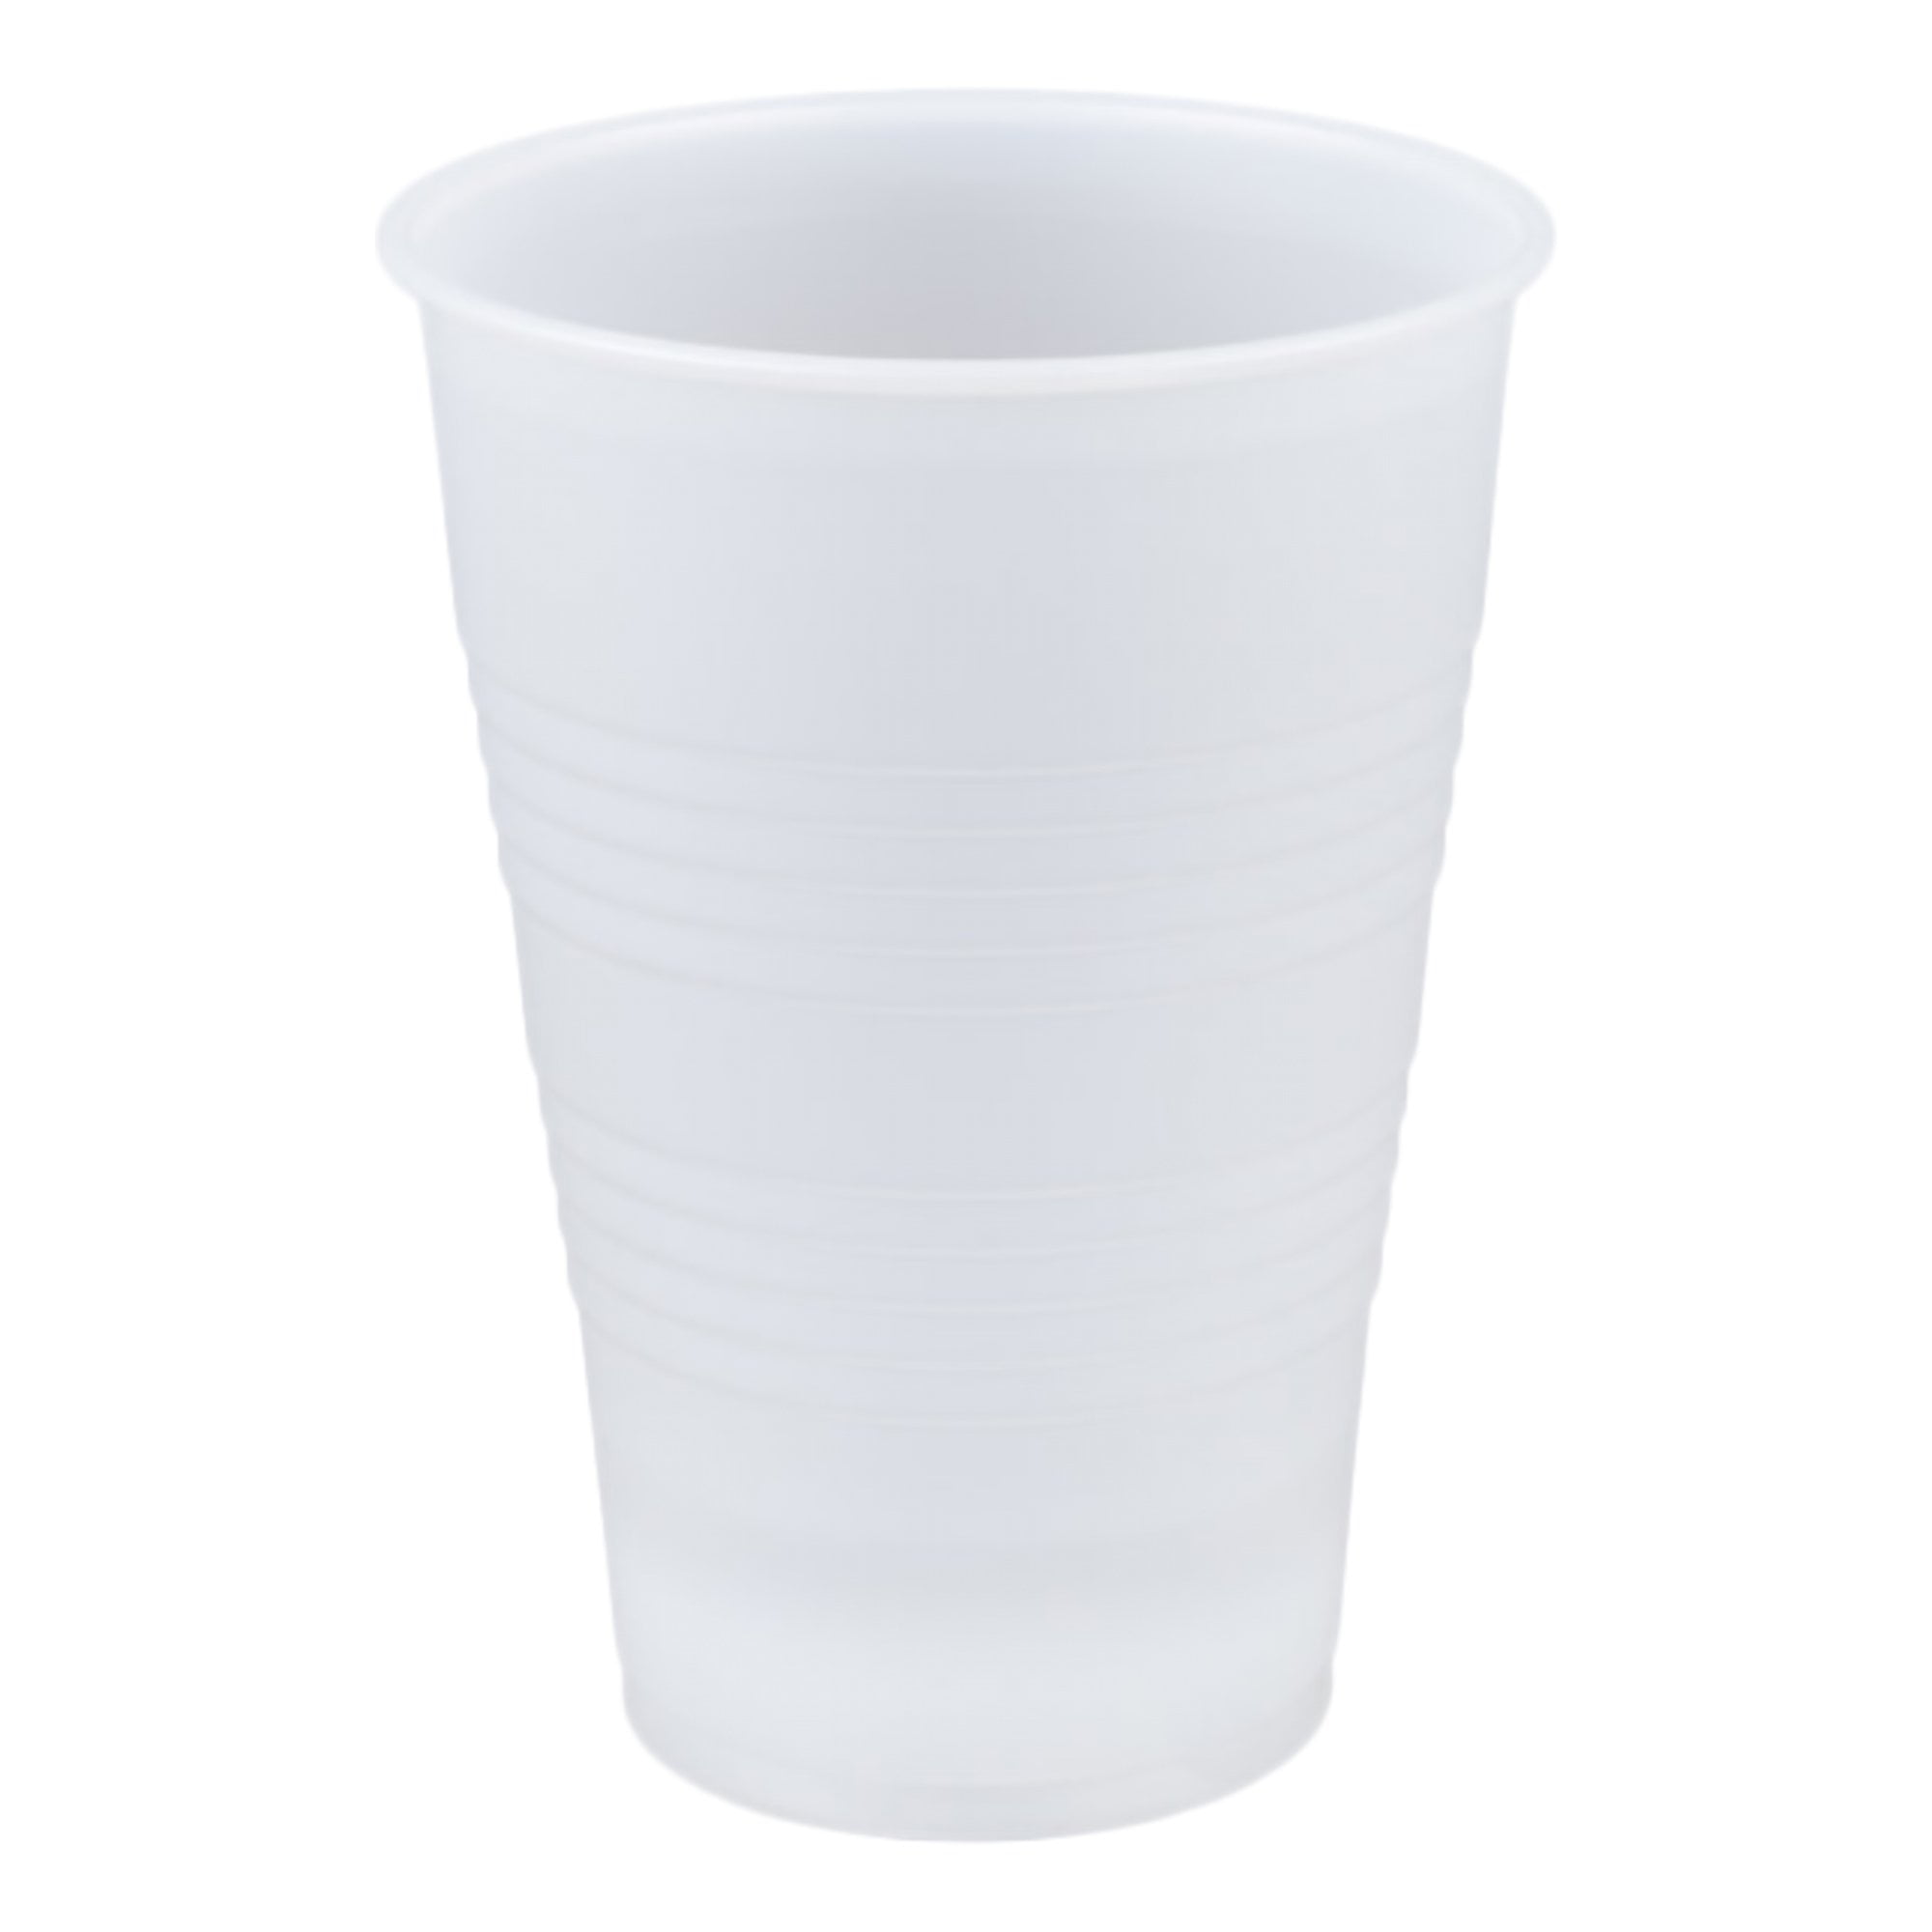 Decony 100 Pc. Clear Plastic Cups with Lids and Straws- 16 Oz Plastic Cups  with Lids Suitable for Ic…See more Decony 100 Pc. Clear Plastic Cups with